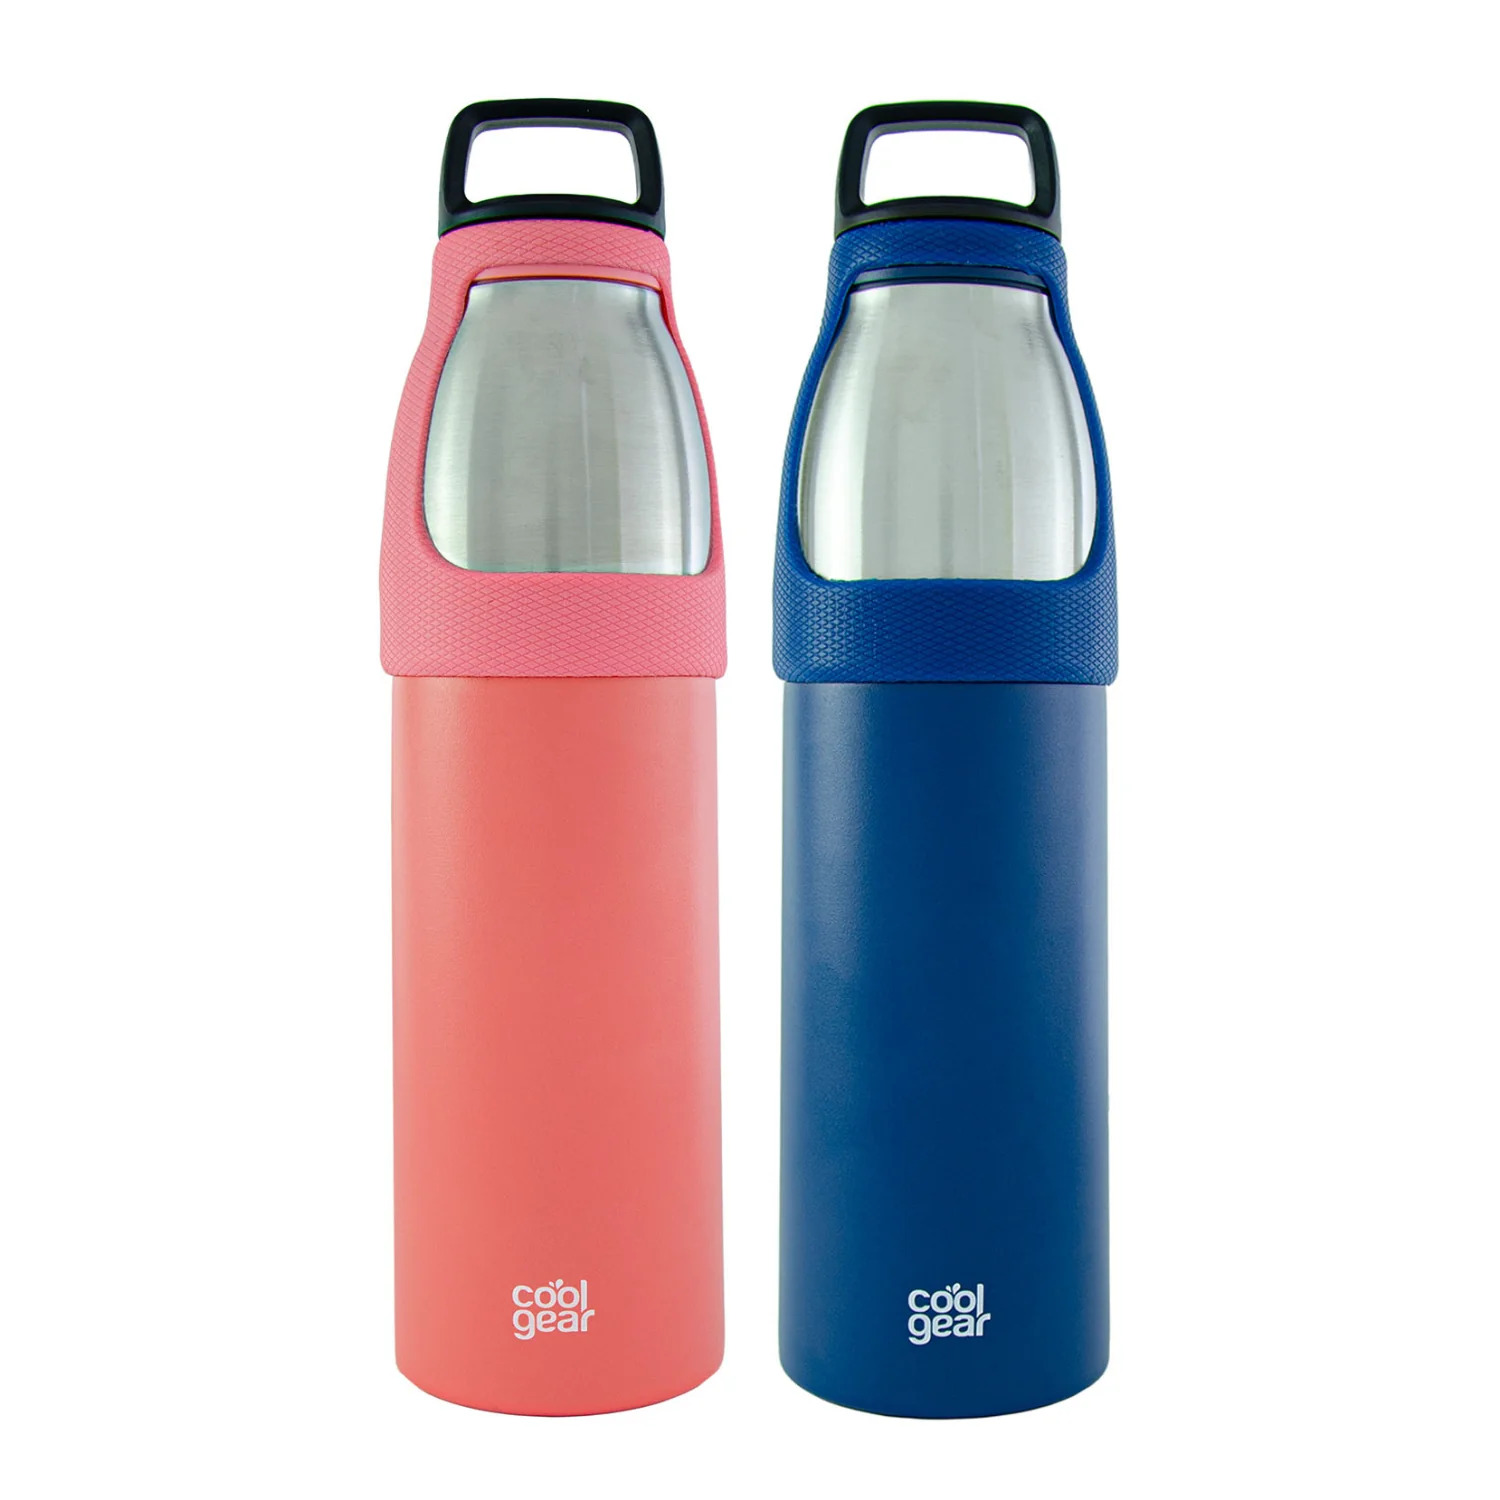 2 Pack COOL GEAR Saturn 24oz Stainless Steel Water Bottle | Silicone Tension Strap Tumbler - image 5 of 5